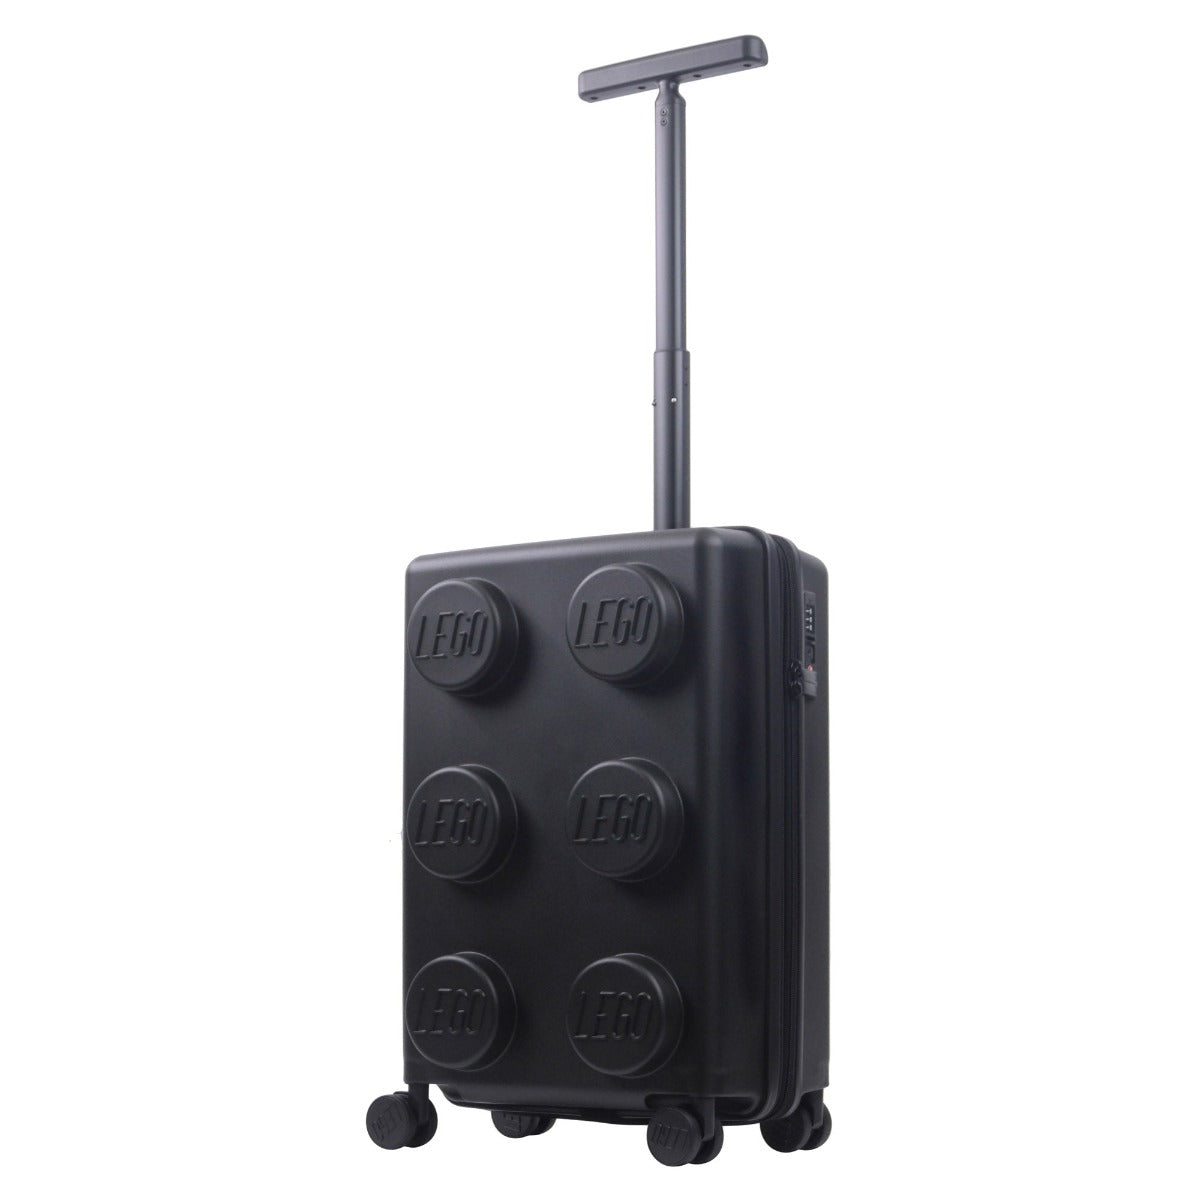 Black Lego Signature Brick 22" carry-on rolling luggage spinner suitcase